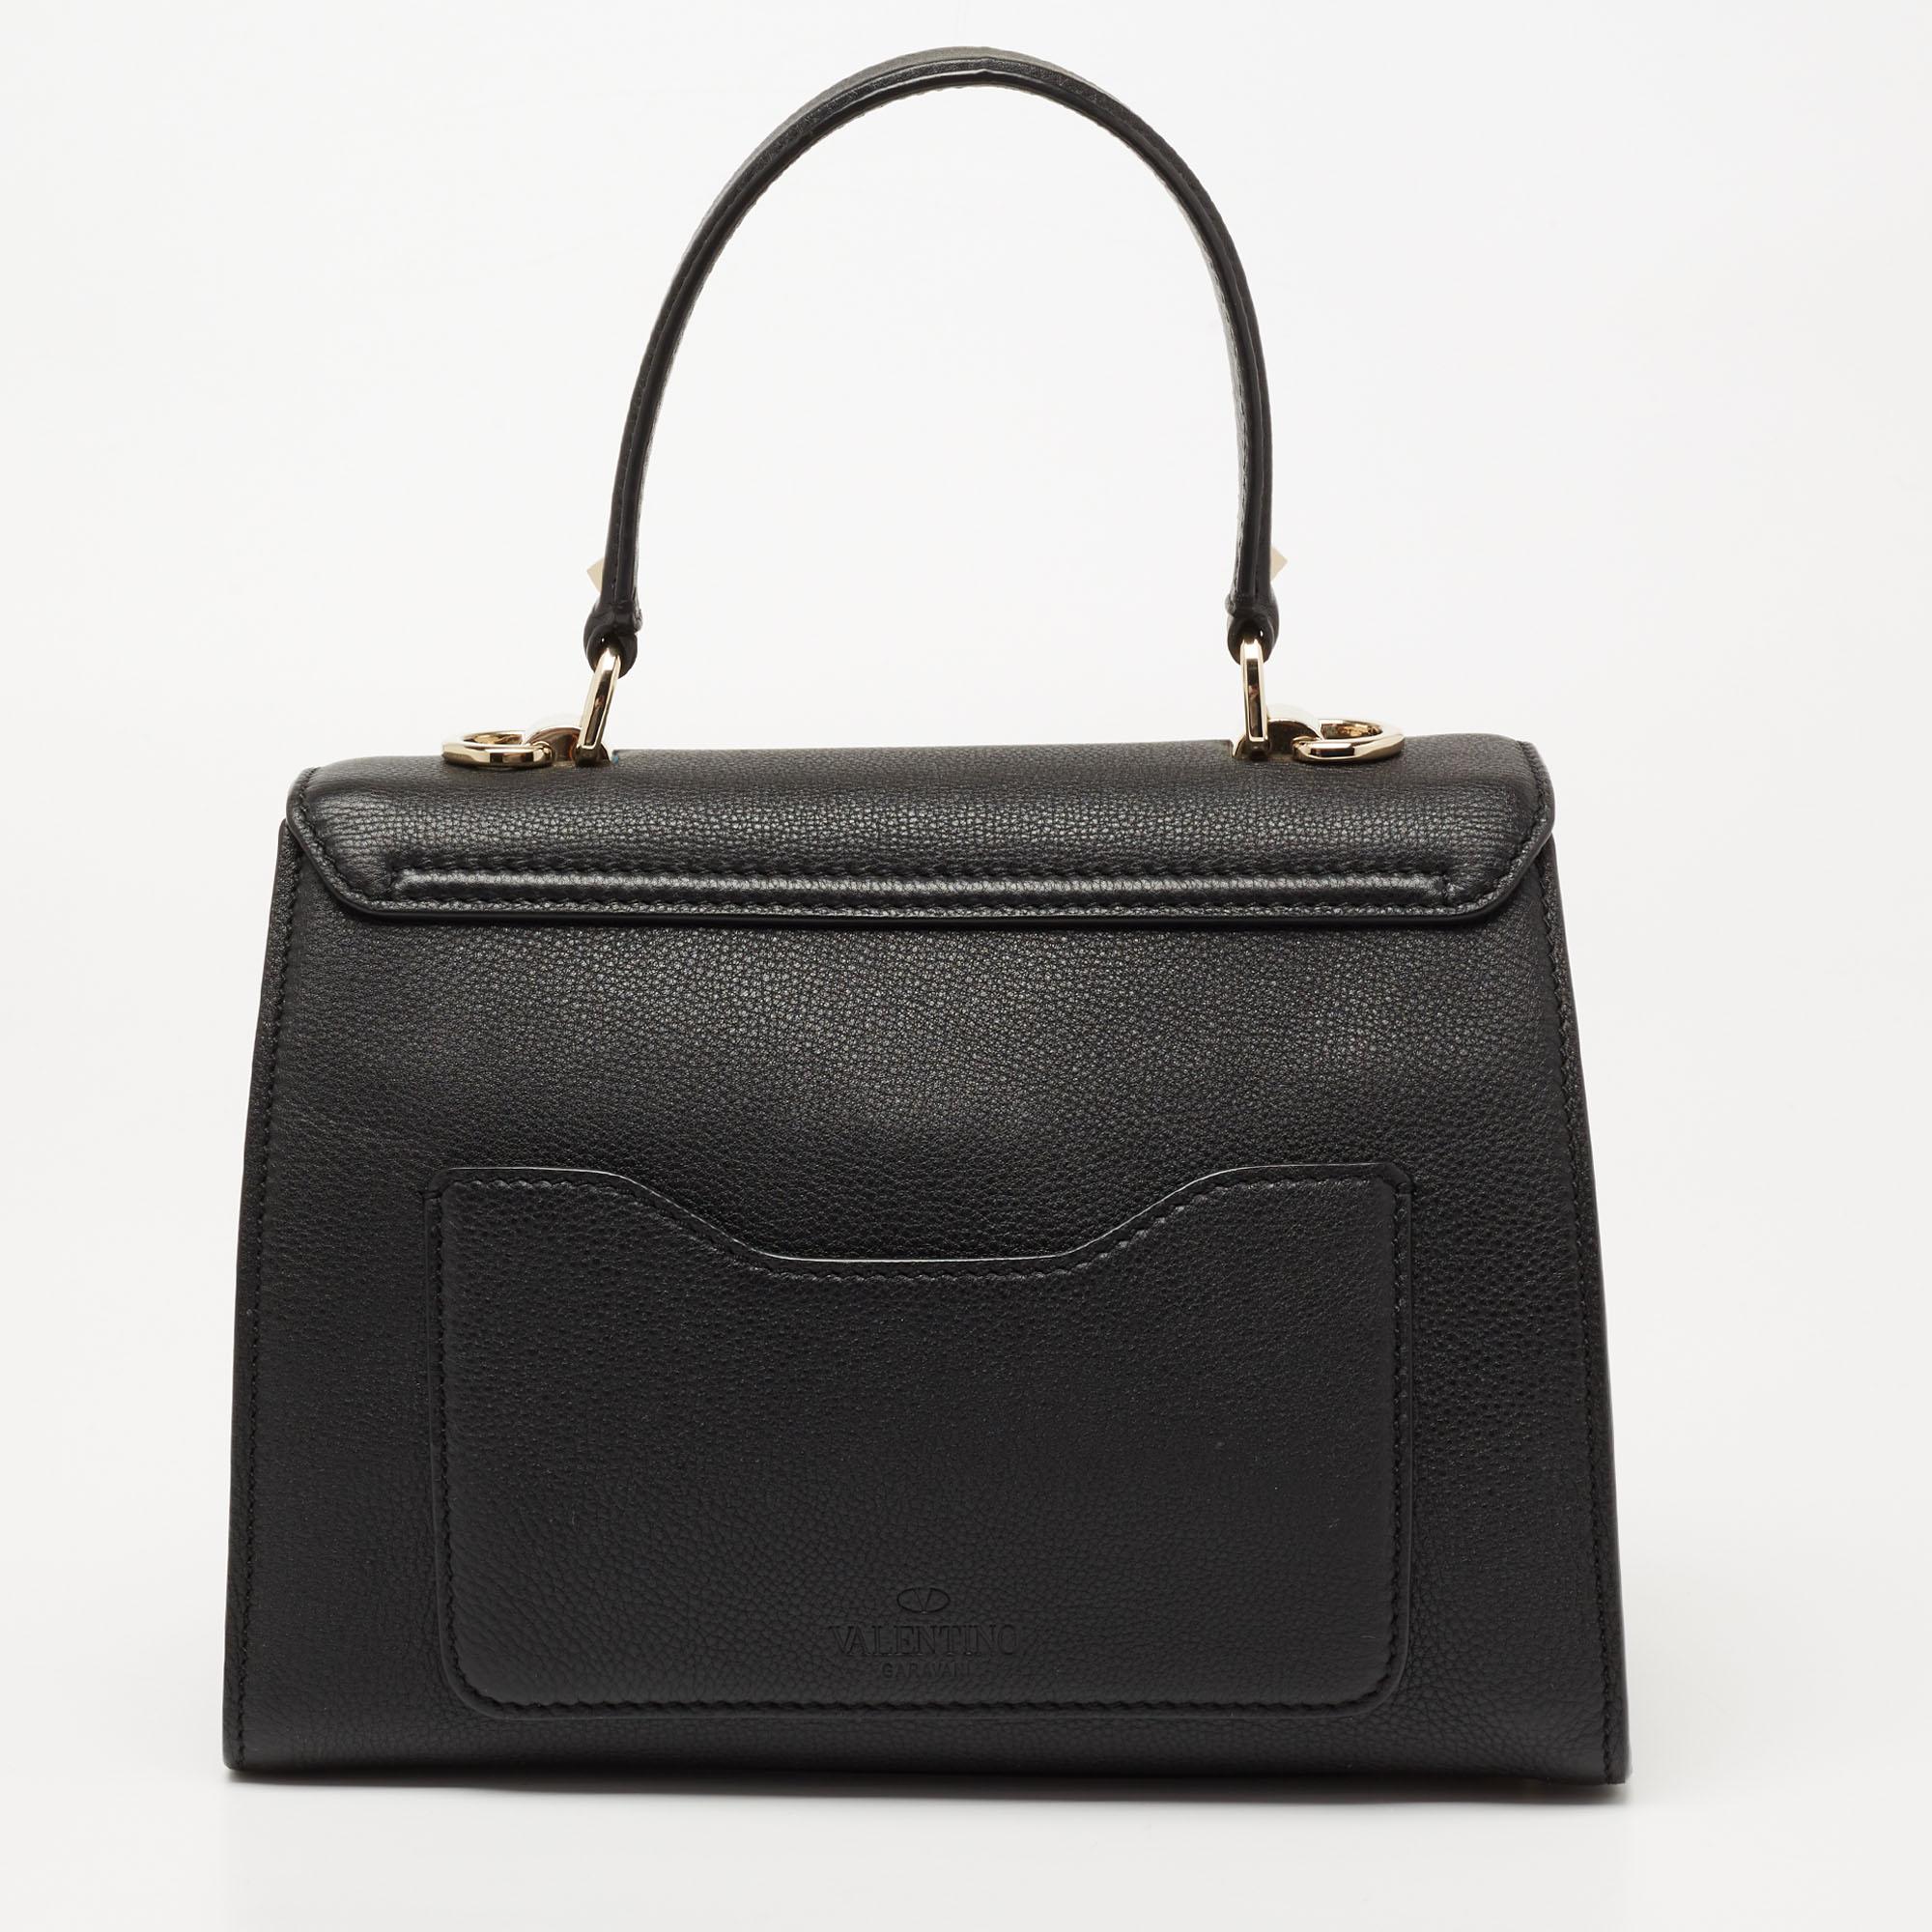 This bag from Valentino is an accessory you would go to season after season. It has been crafted from black leather into a flap style. It comes with a top handle, crossbody strap, and suede lining.

Includes: Original Dustbag, Info Booklet, Extra